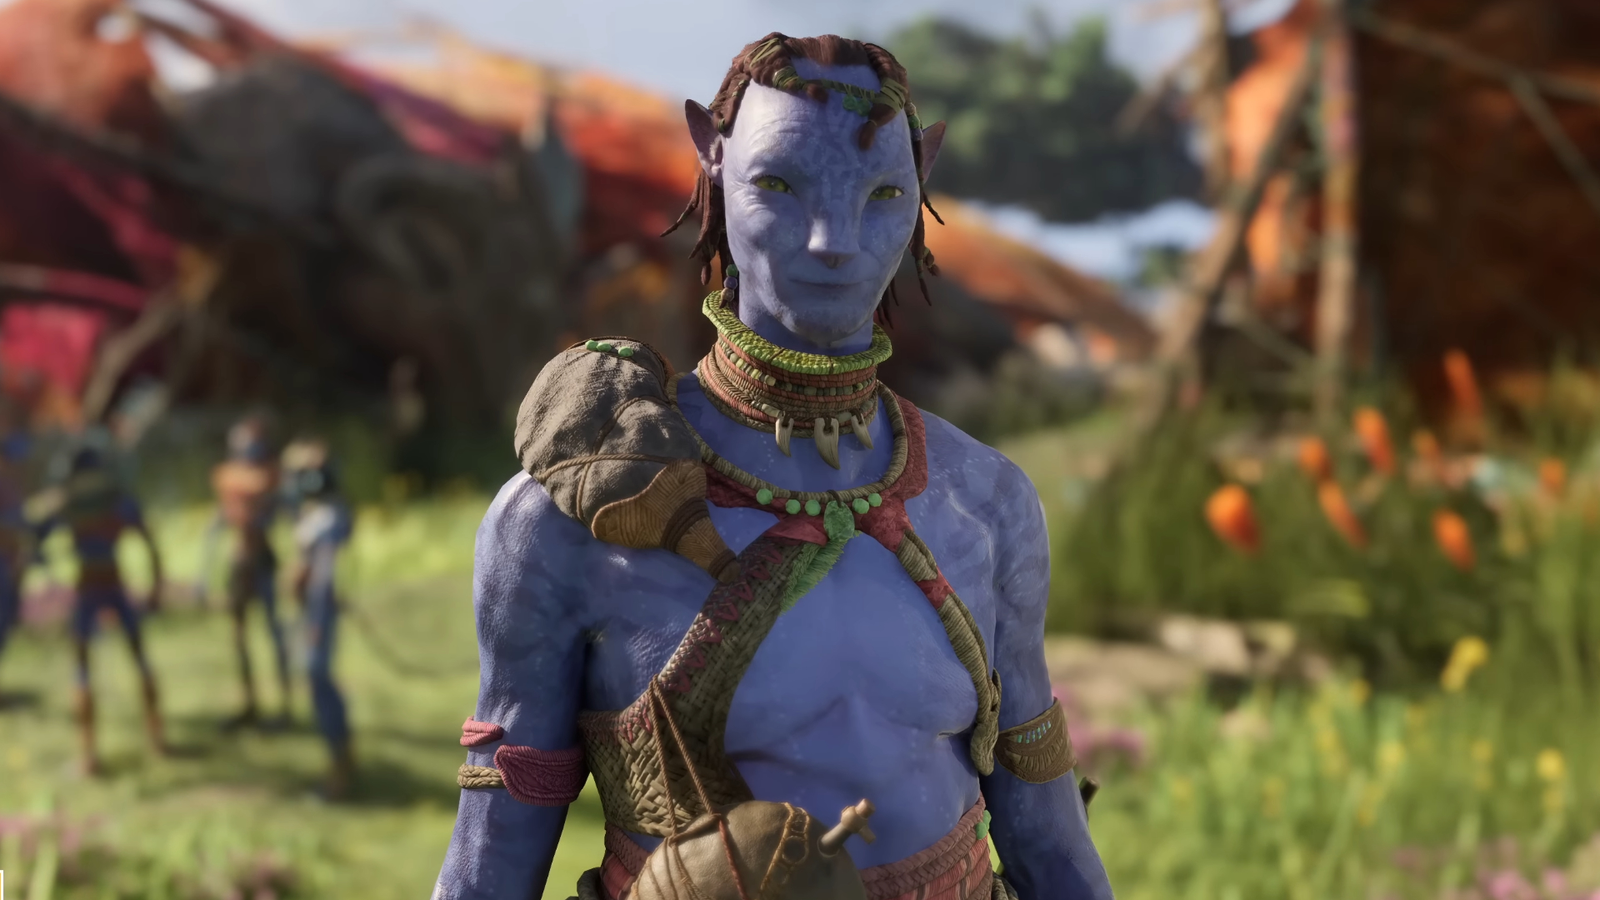 Avatar: Frontiers of Pandora reveals its gameplay, story, release